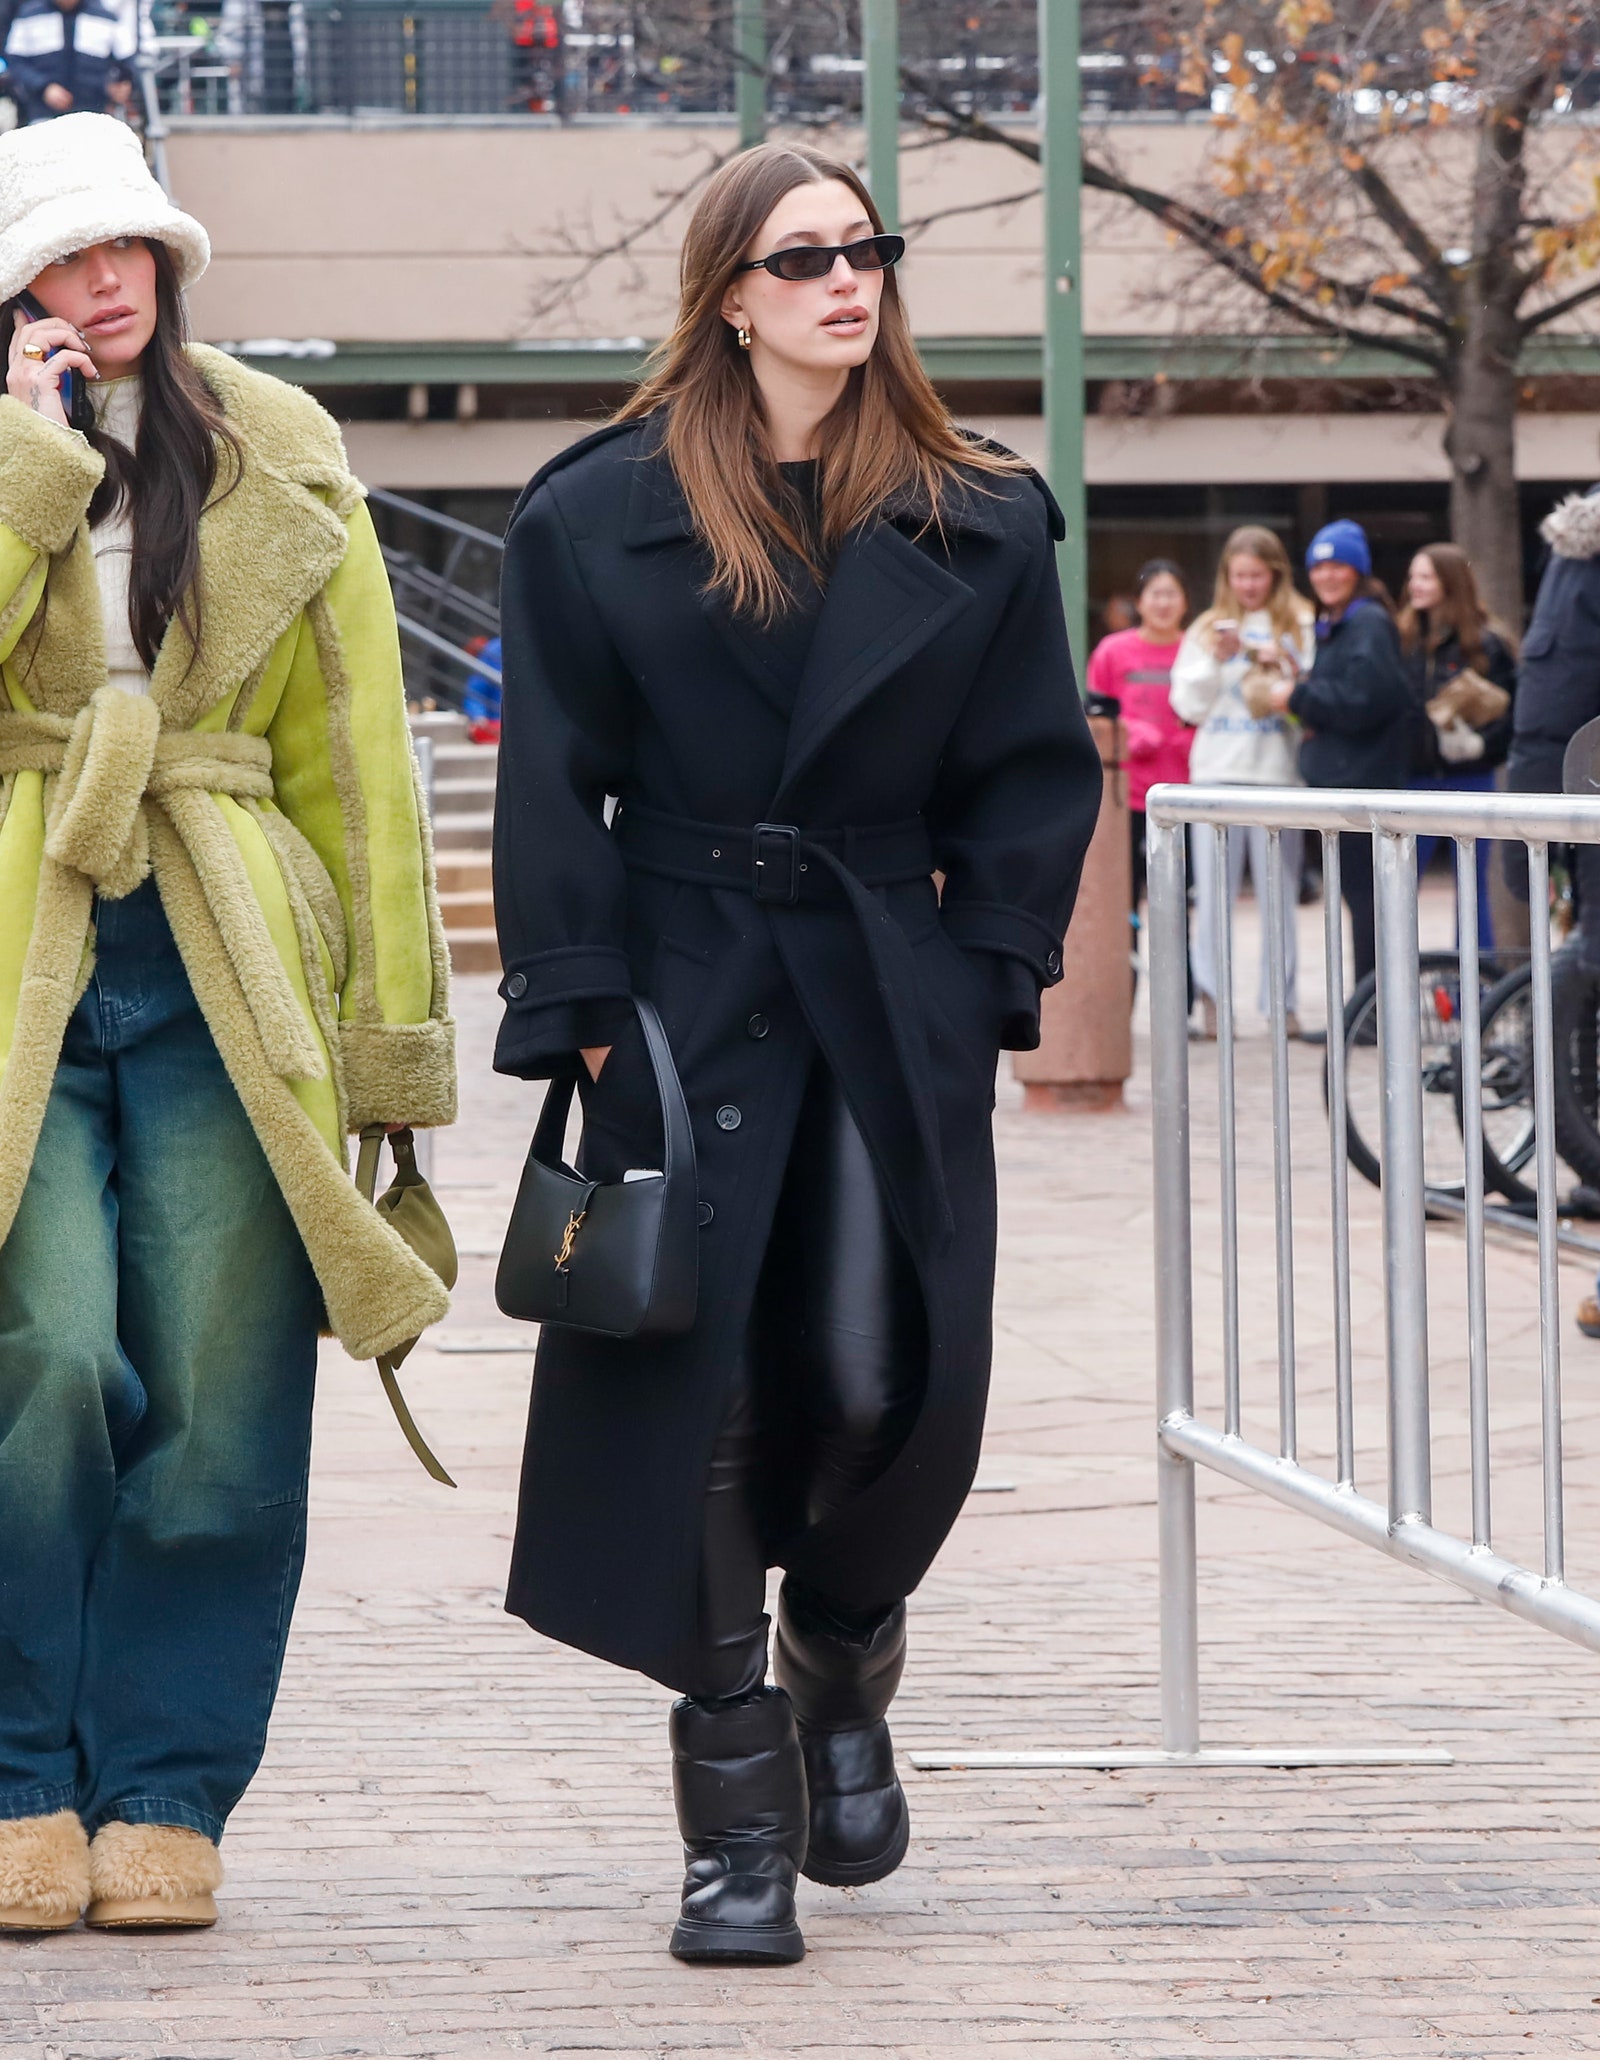 All black with an oversized coat to boot.